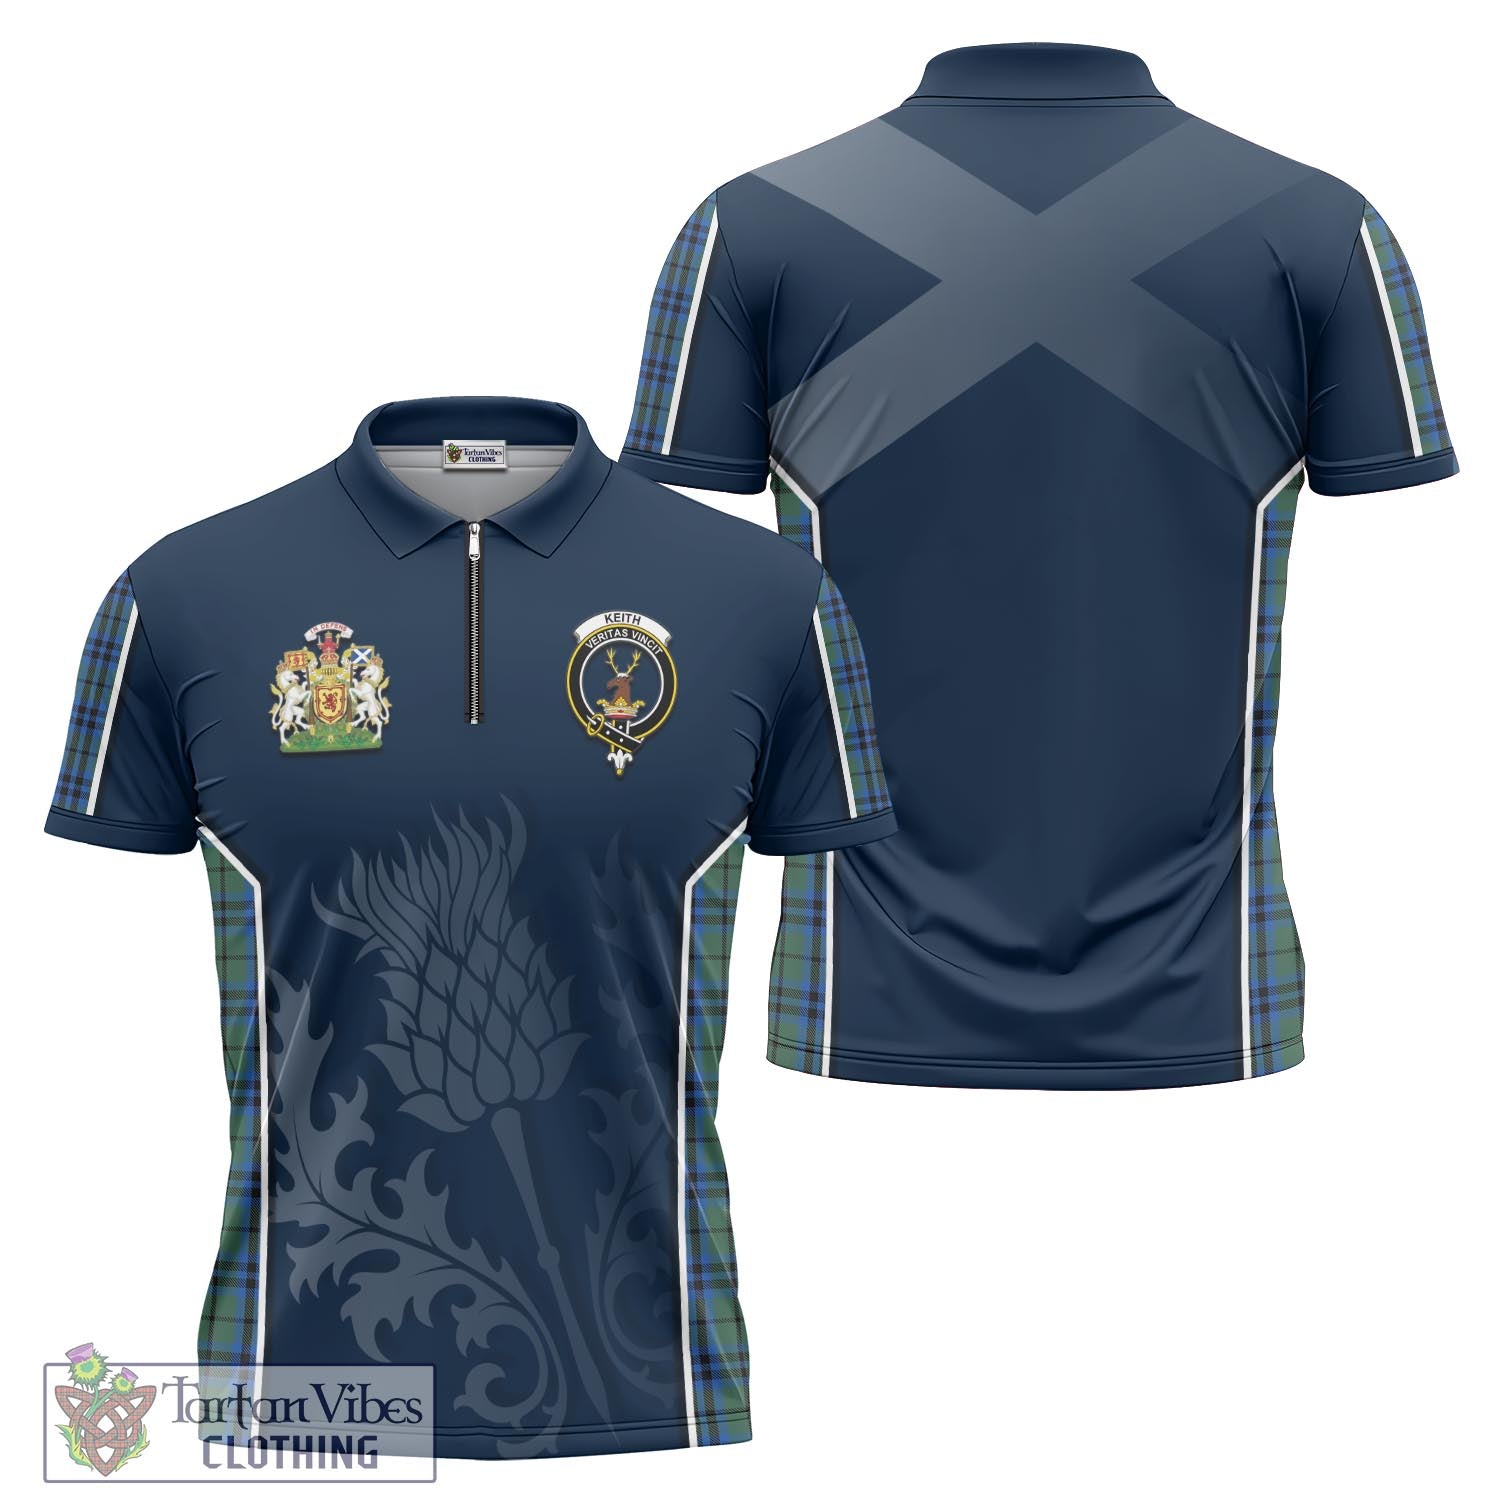 Tartan Vibes Clothing Keith Tartan Zipper Polo Shirt with Family Crest and Scottish Thistle Vibes Sport Style